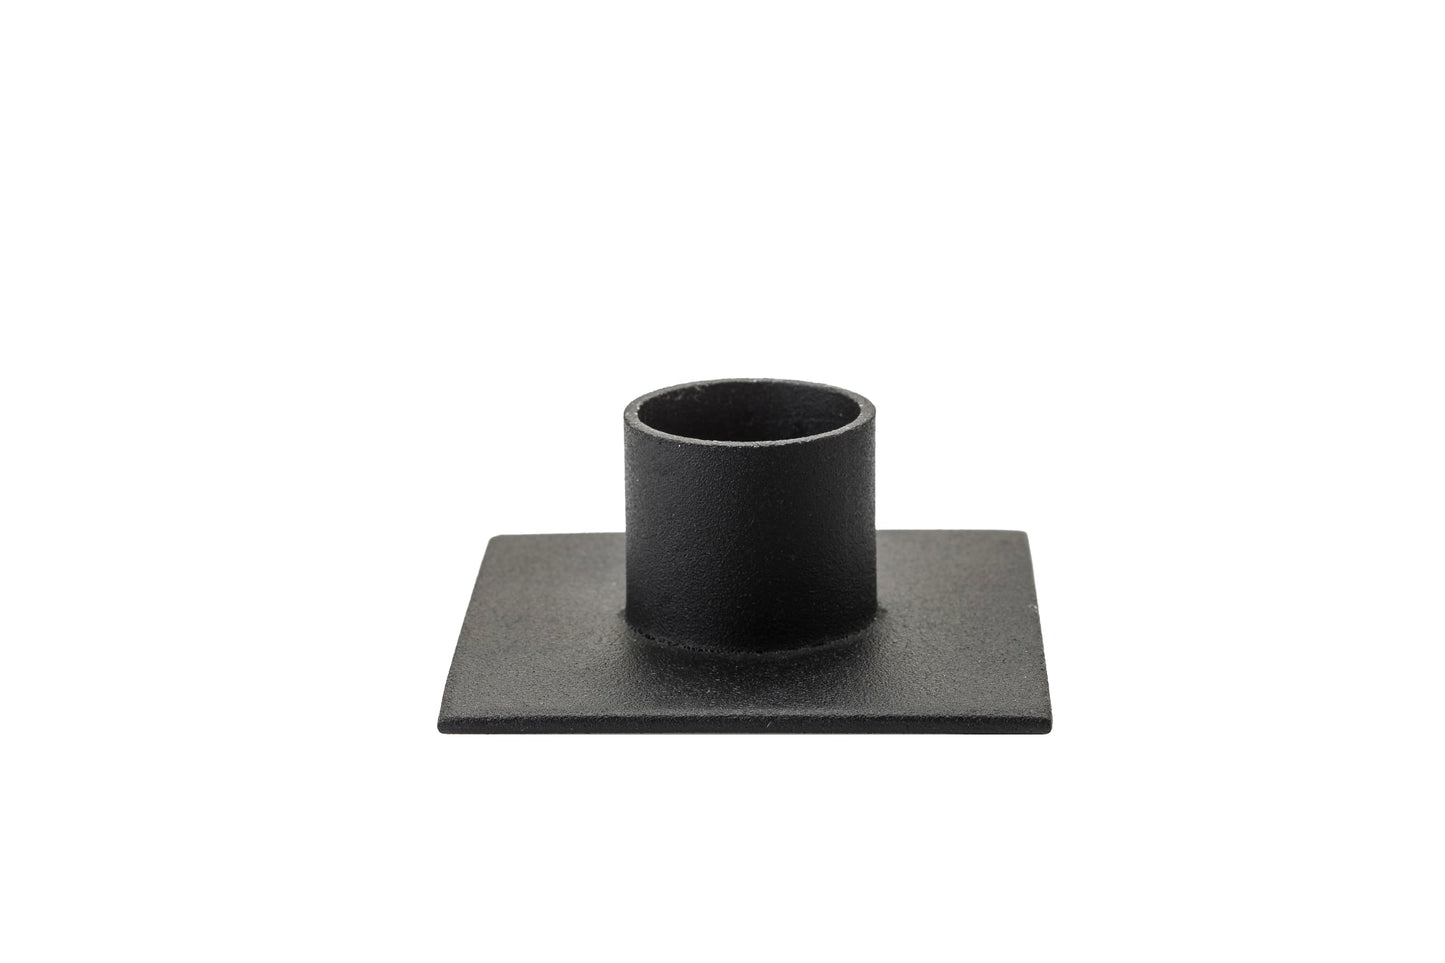 The Square (3 cm candle) - Black